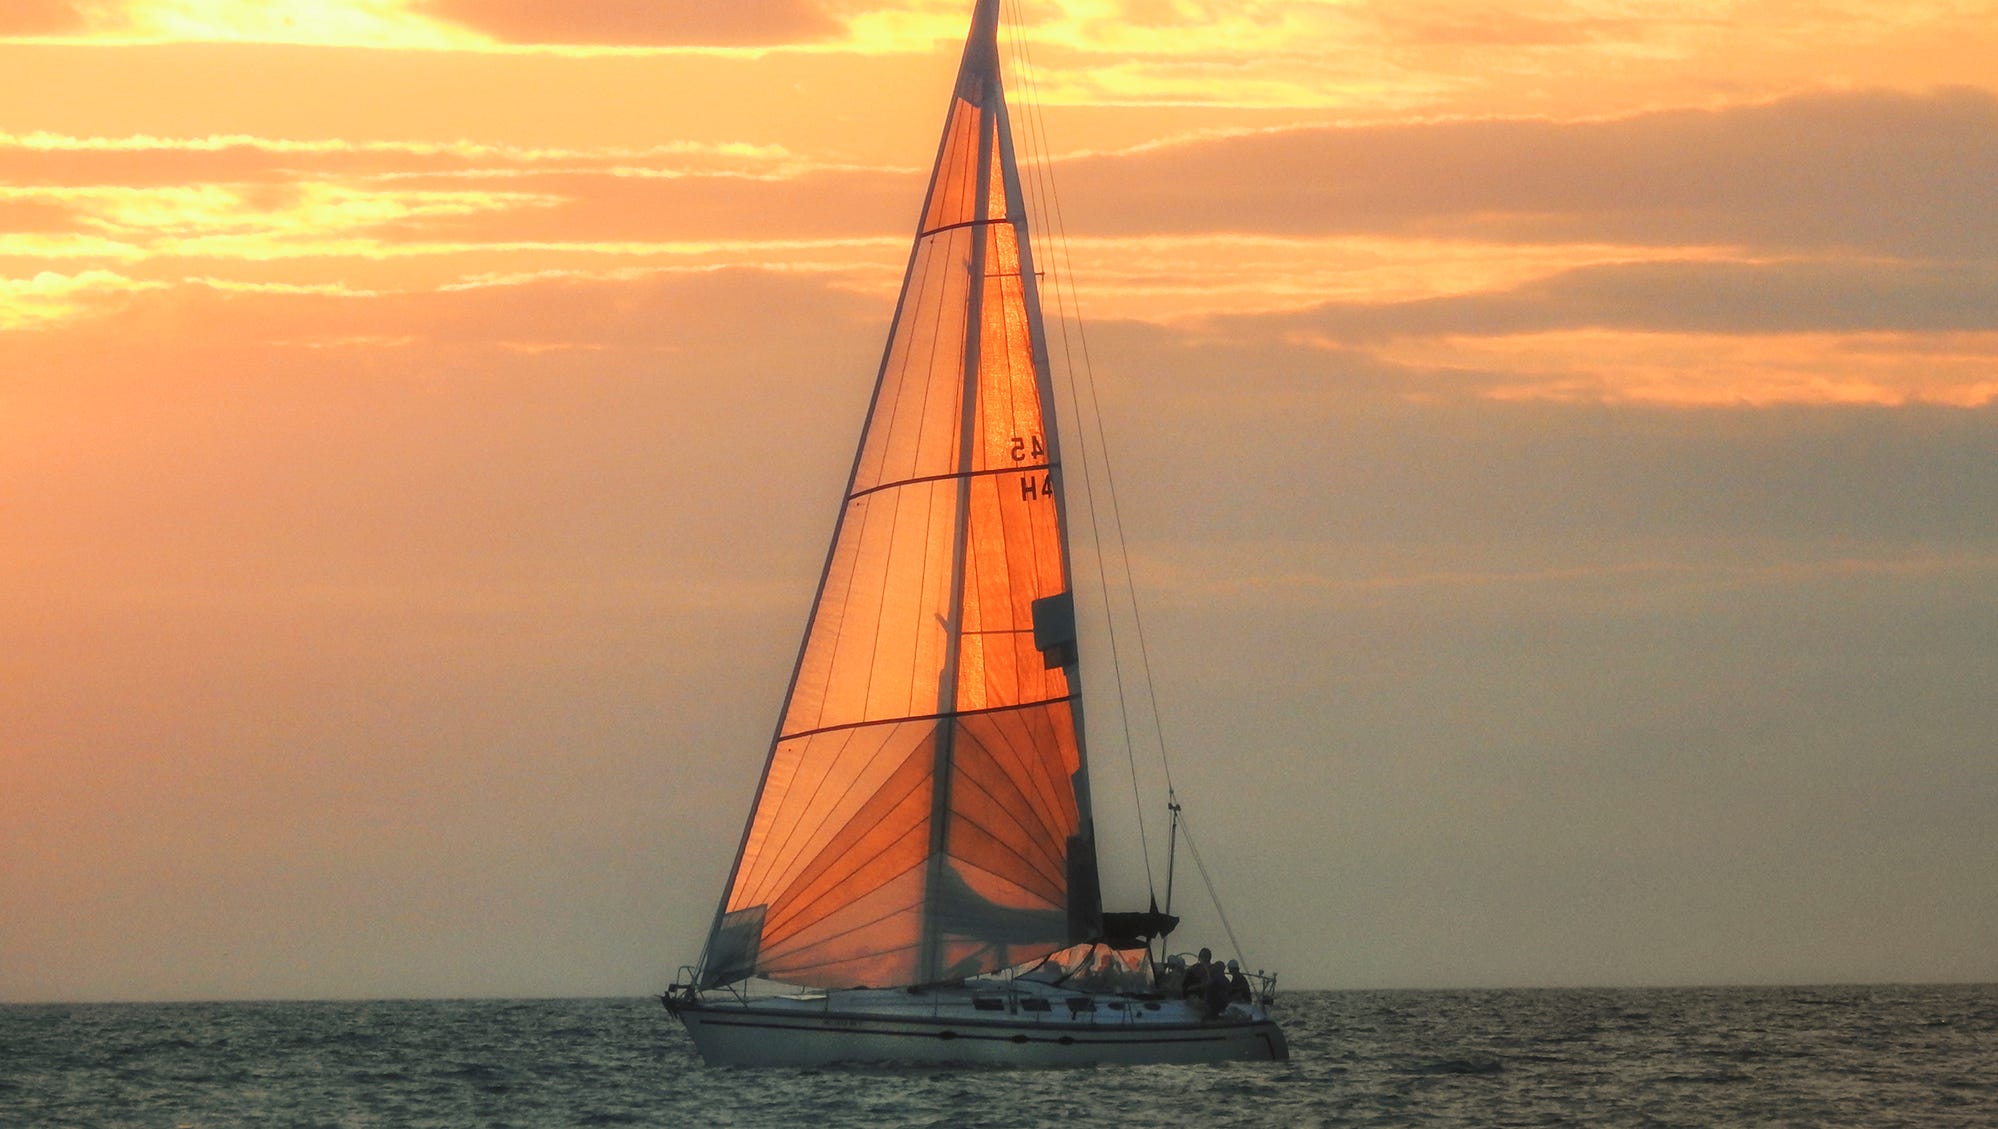 "Fiery Sail on Lake Michigan," by Janette Dywasuk of Holland, was taken at sunset from Holland State Park.